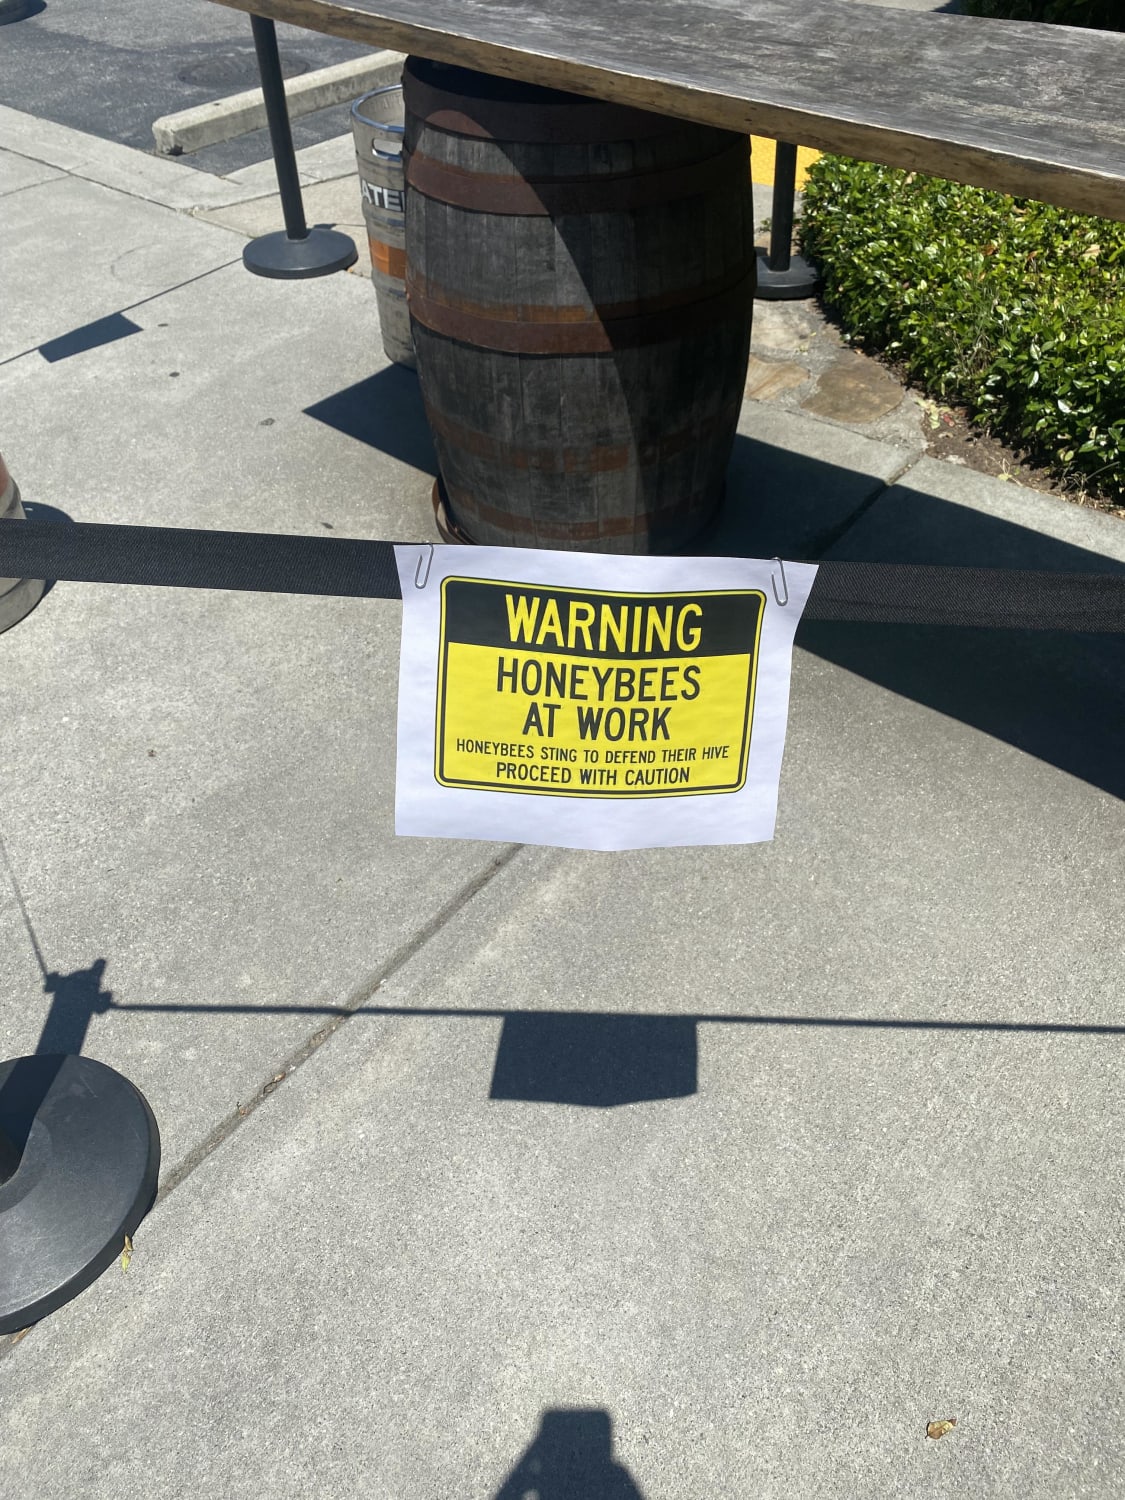 The brewery I work at has some pollen buddies. Instead of killing them they just put up signs warning customers to not mess with the hive.